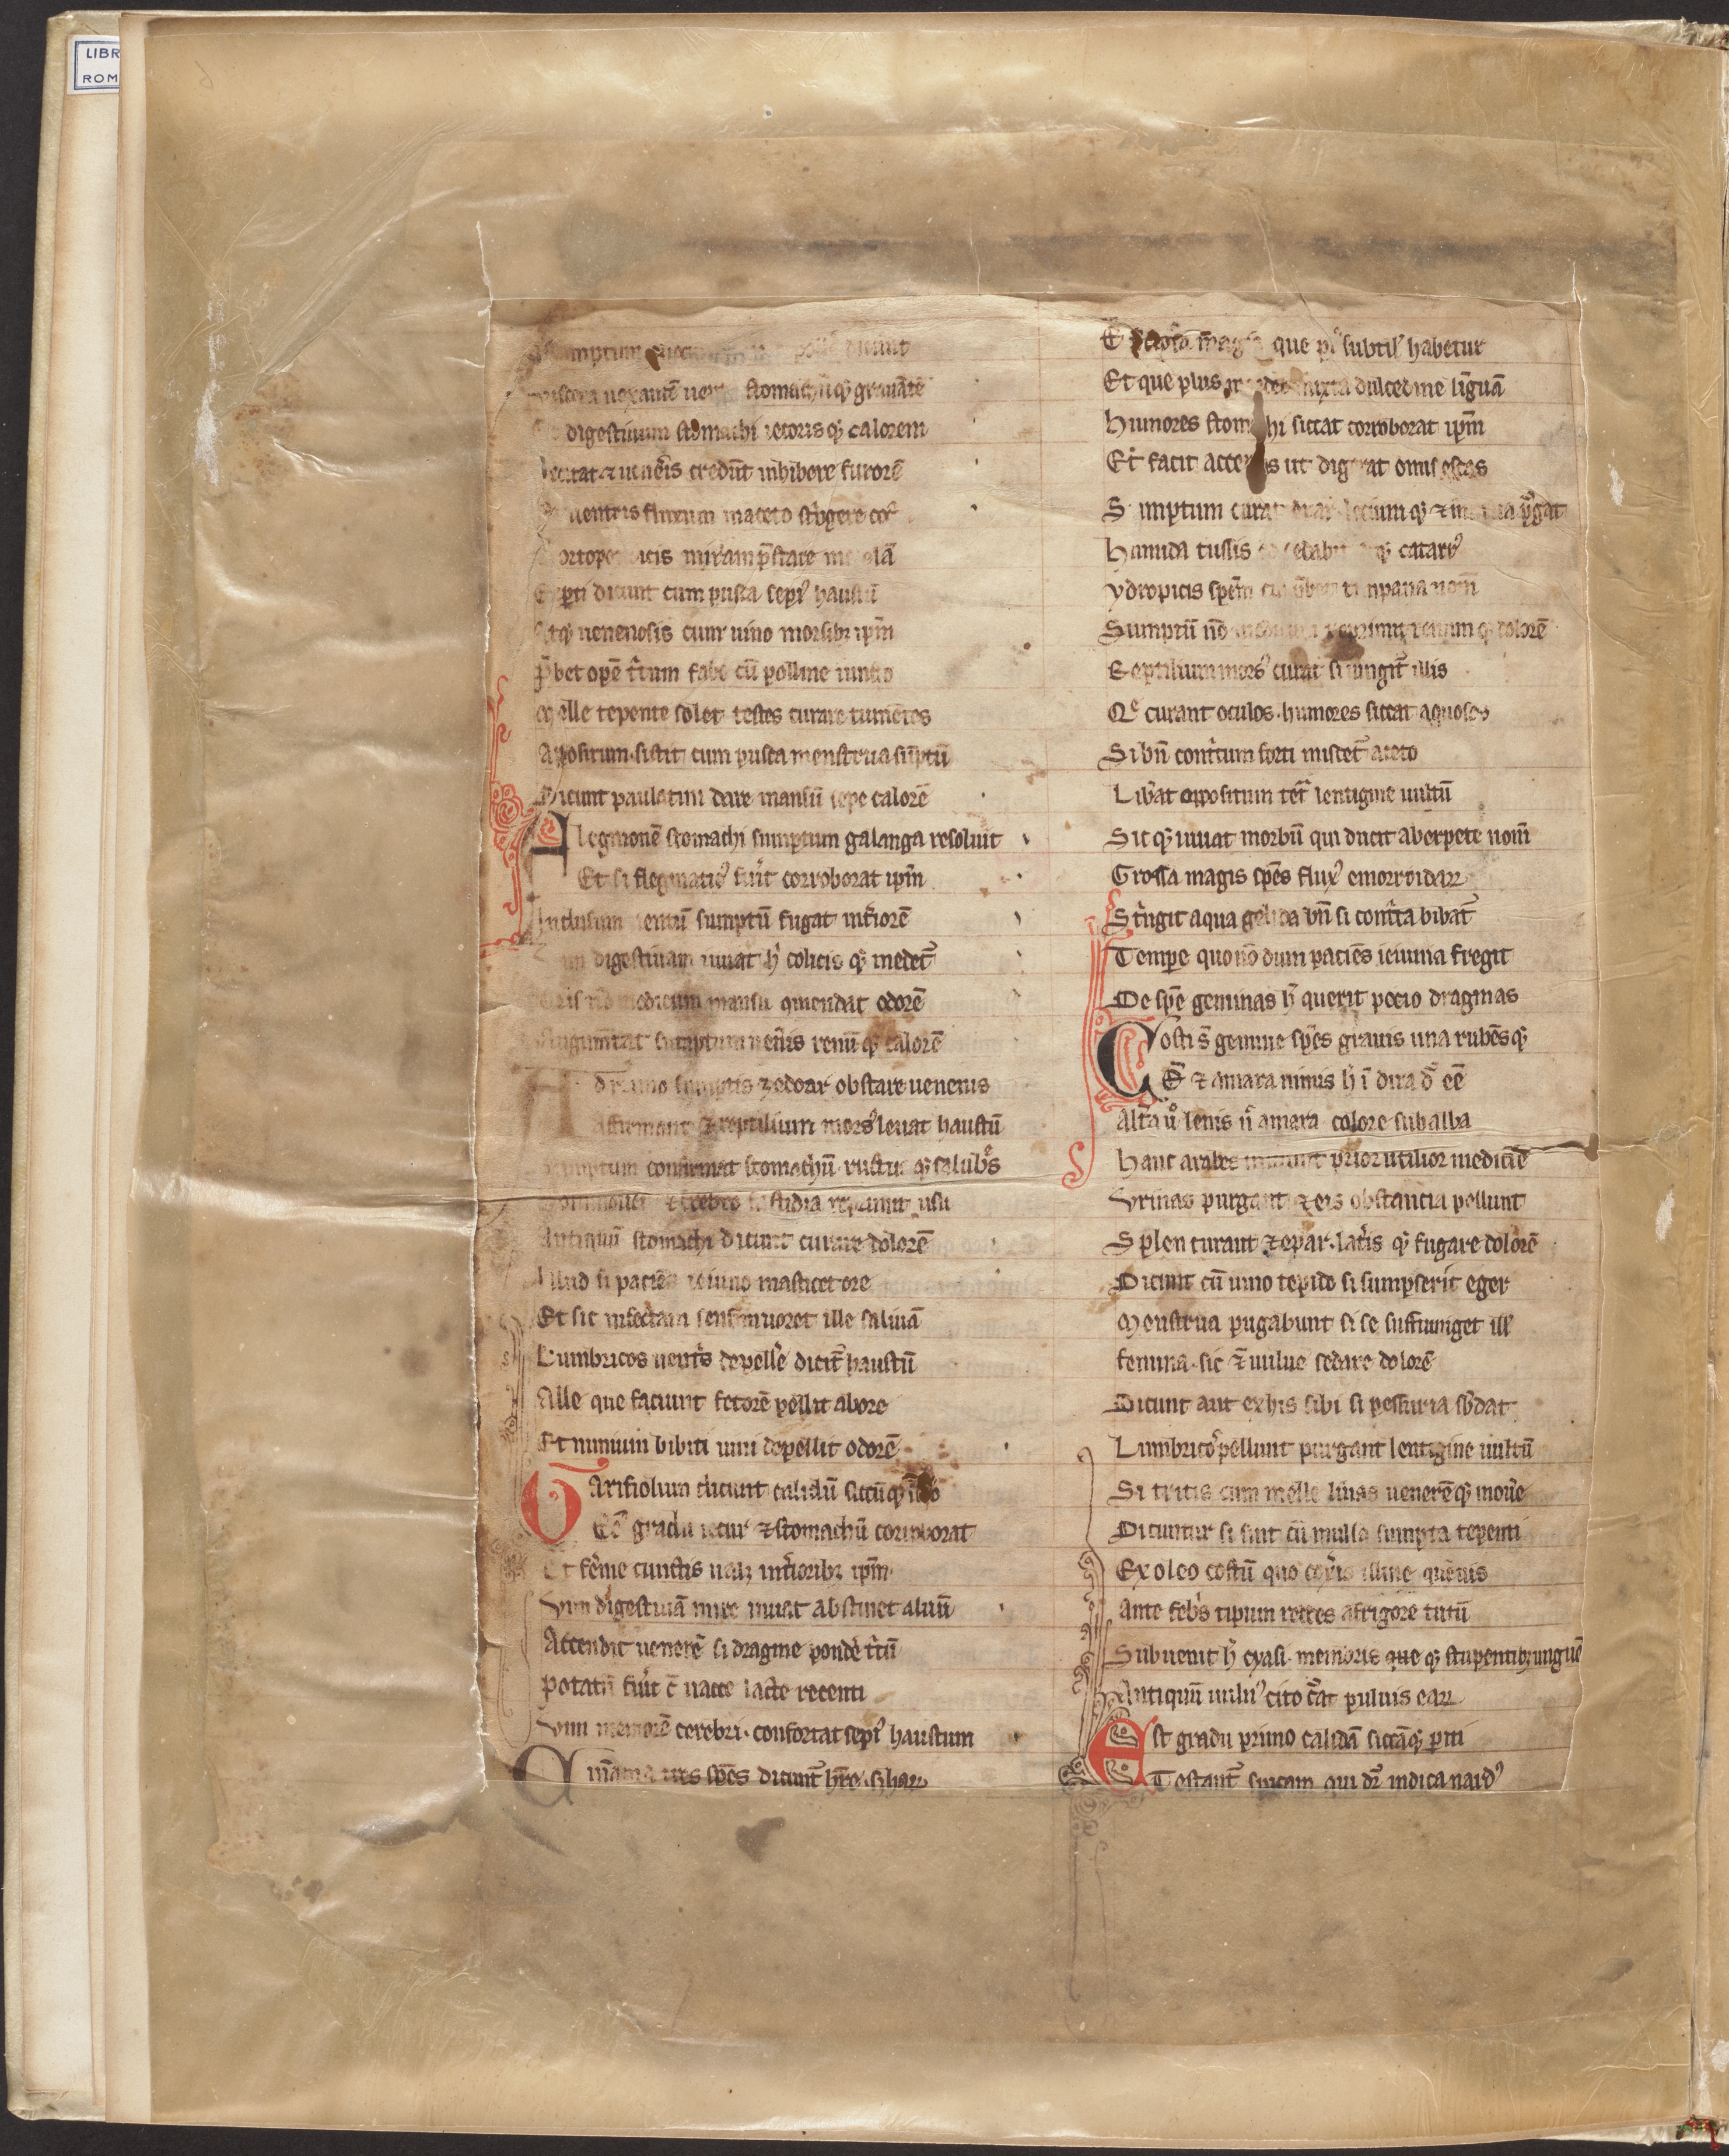 Macer, . (1300). Macer Floridus: [a section of the medieval herbal, on 2 damaged leaves].